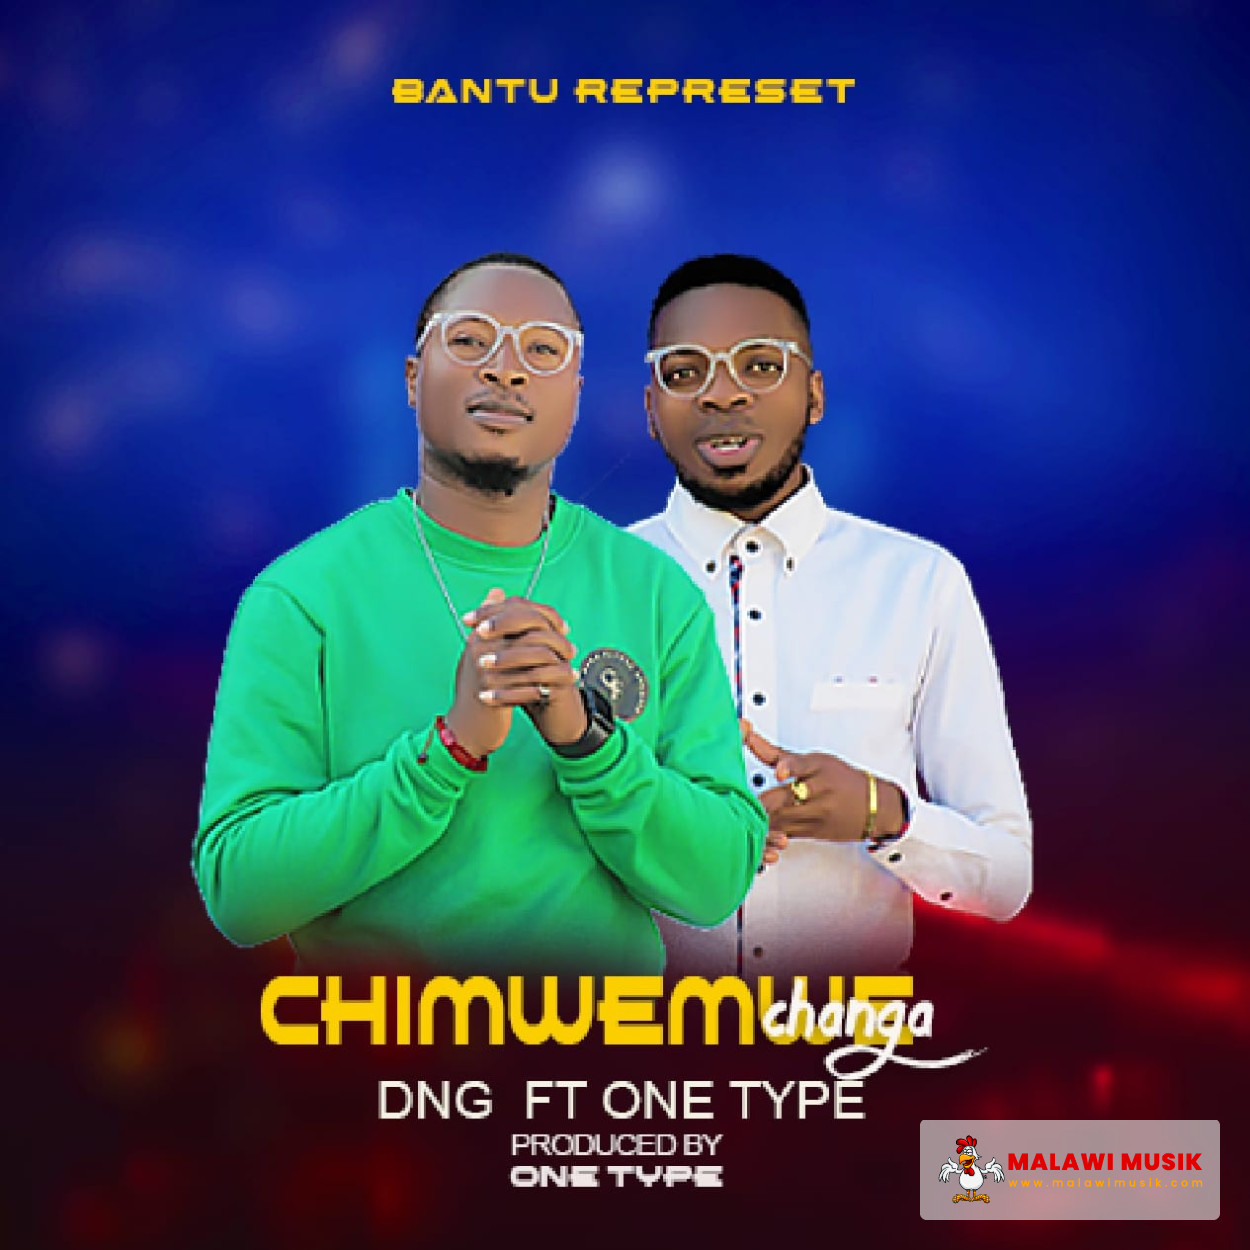 DNG-DNG - Chimwemwe Changa Ft One Type (Prod. One Type & J Col Beats)-song artwork cover